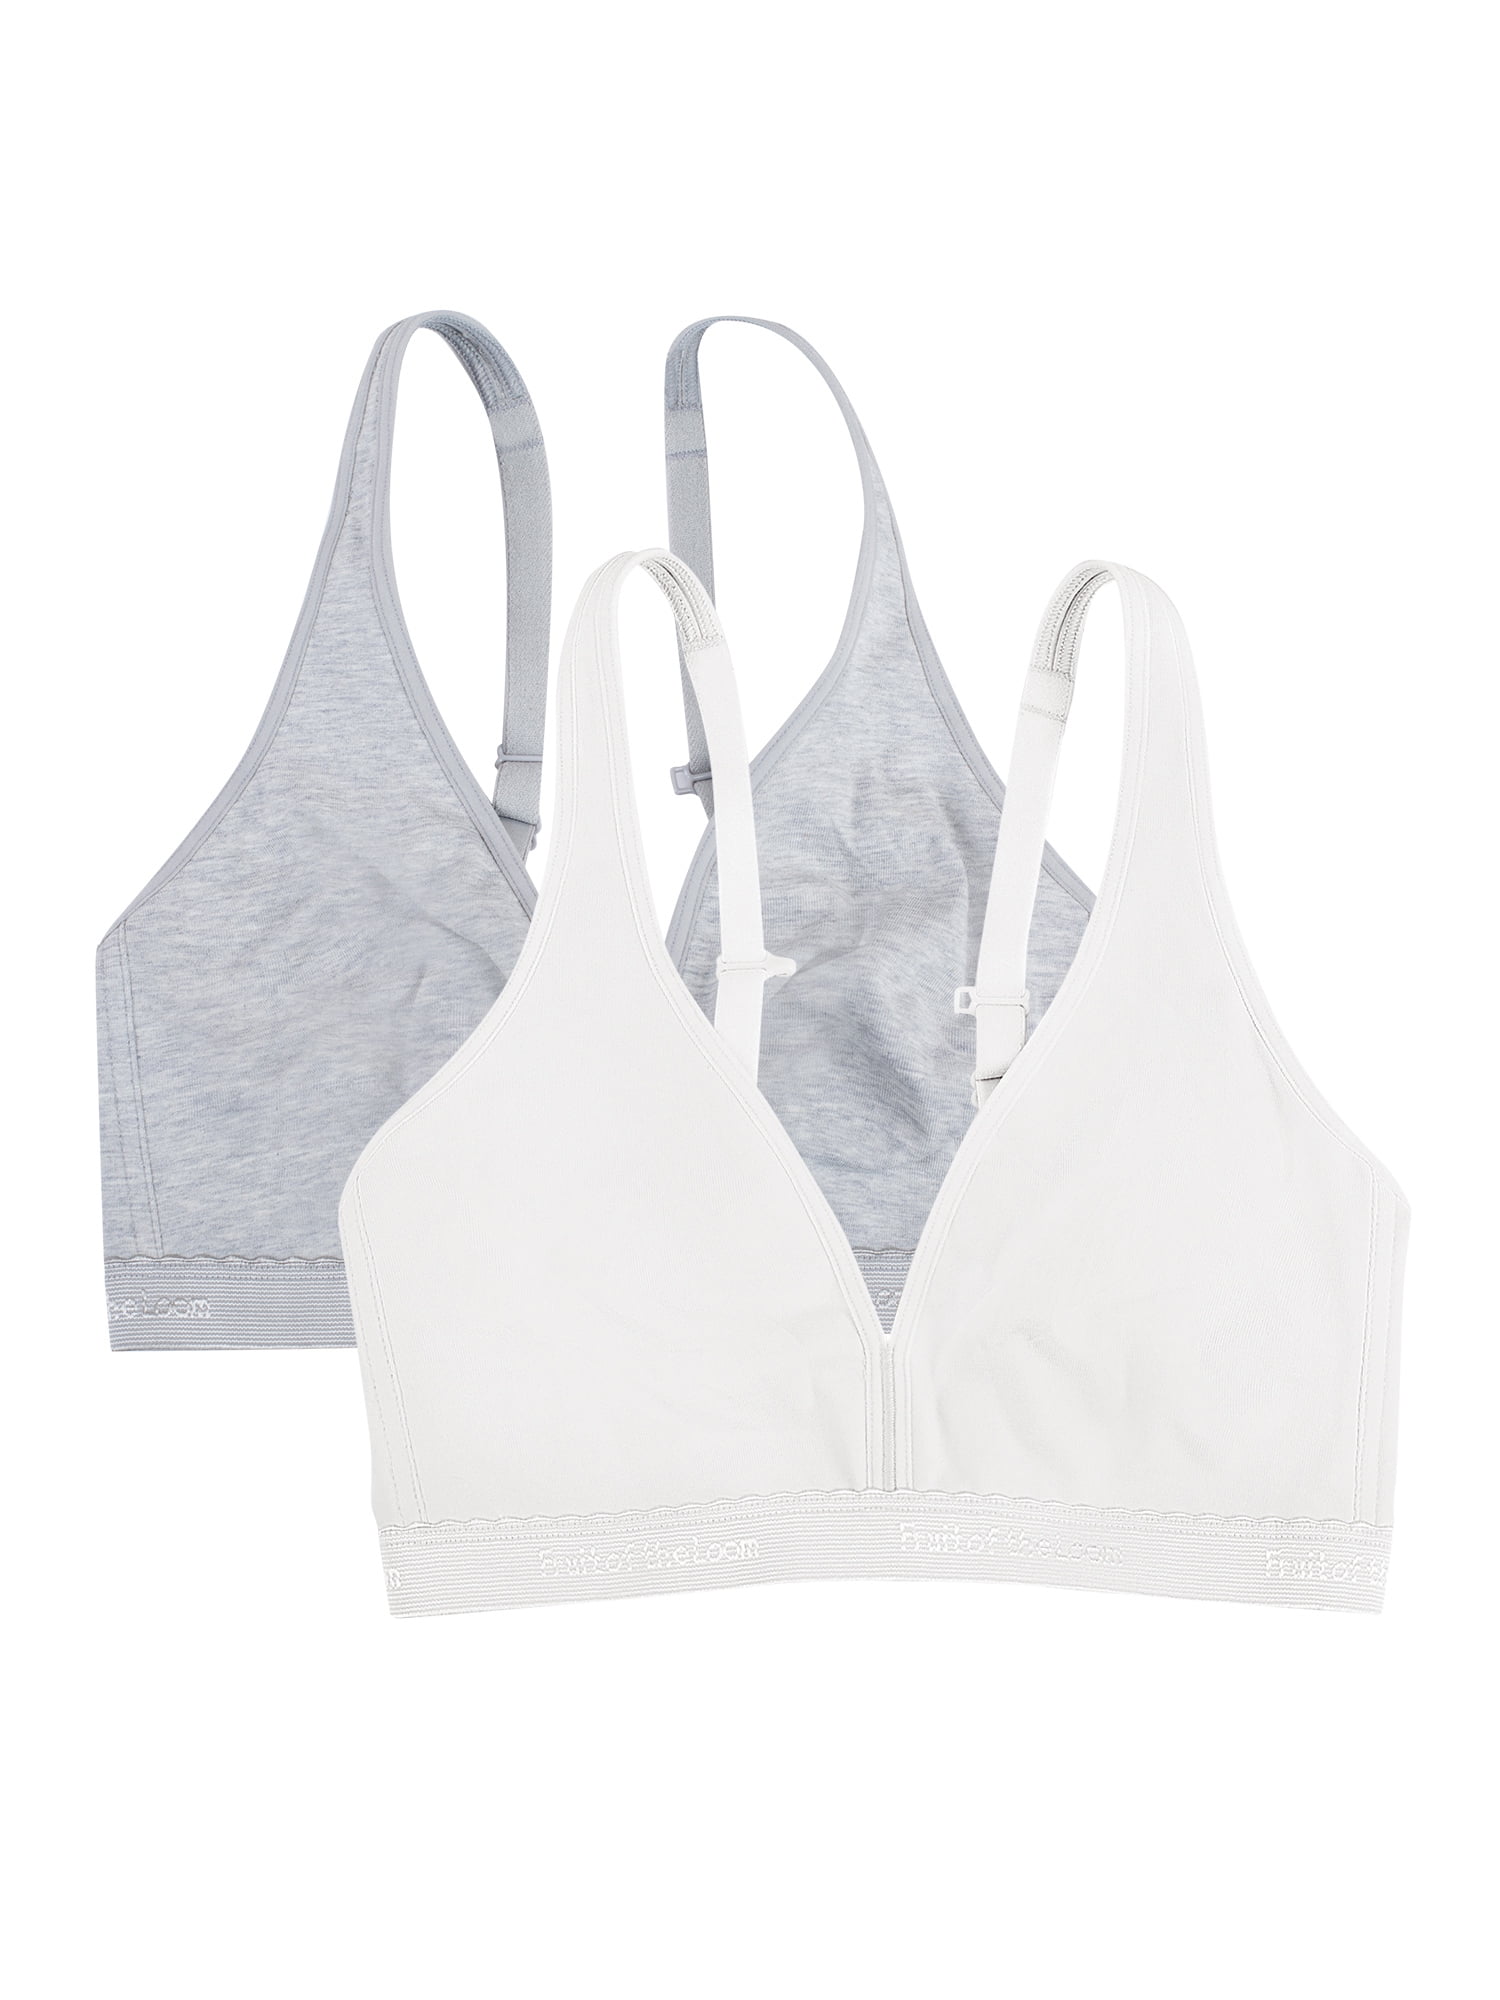 Fruit of the Loom Women's Wirefree Cotton Bralette, 2-pack, Style